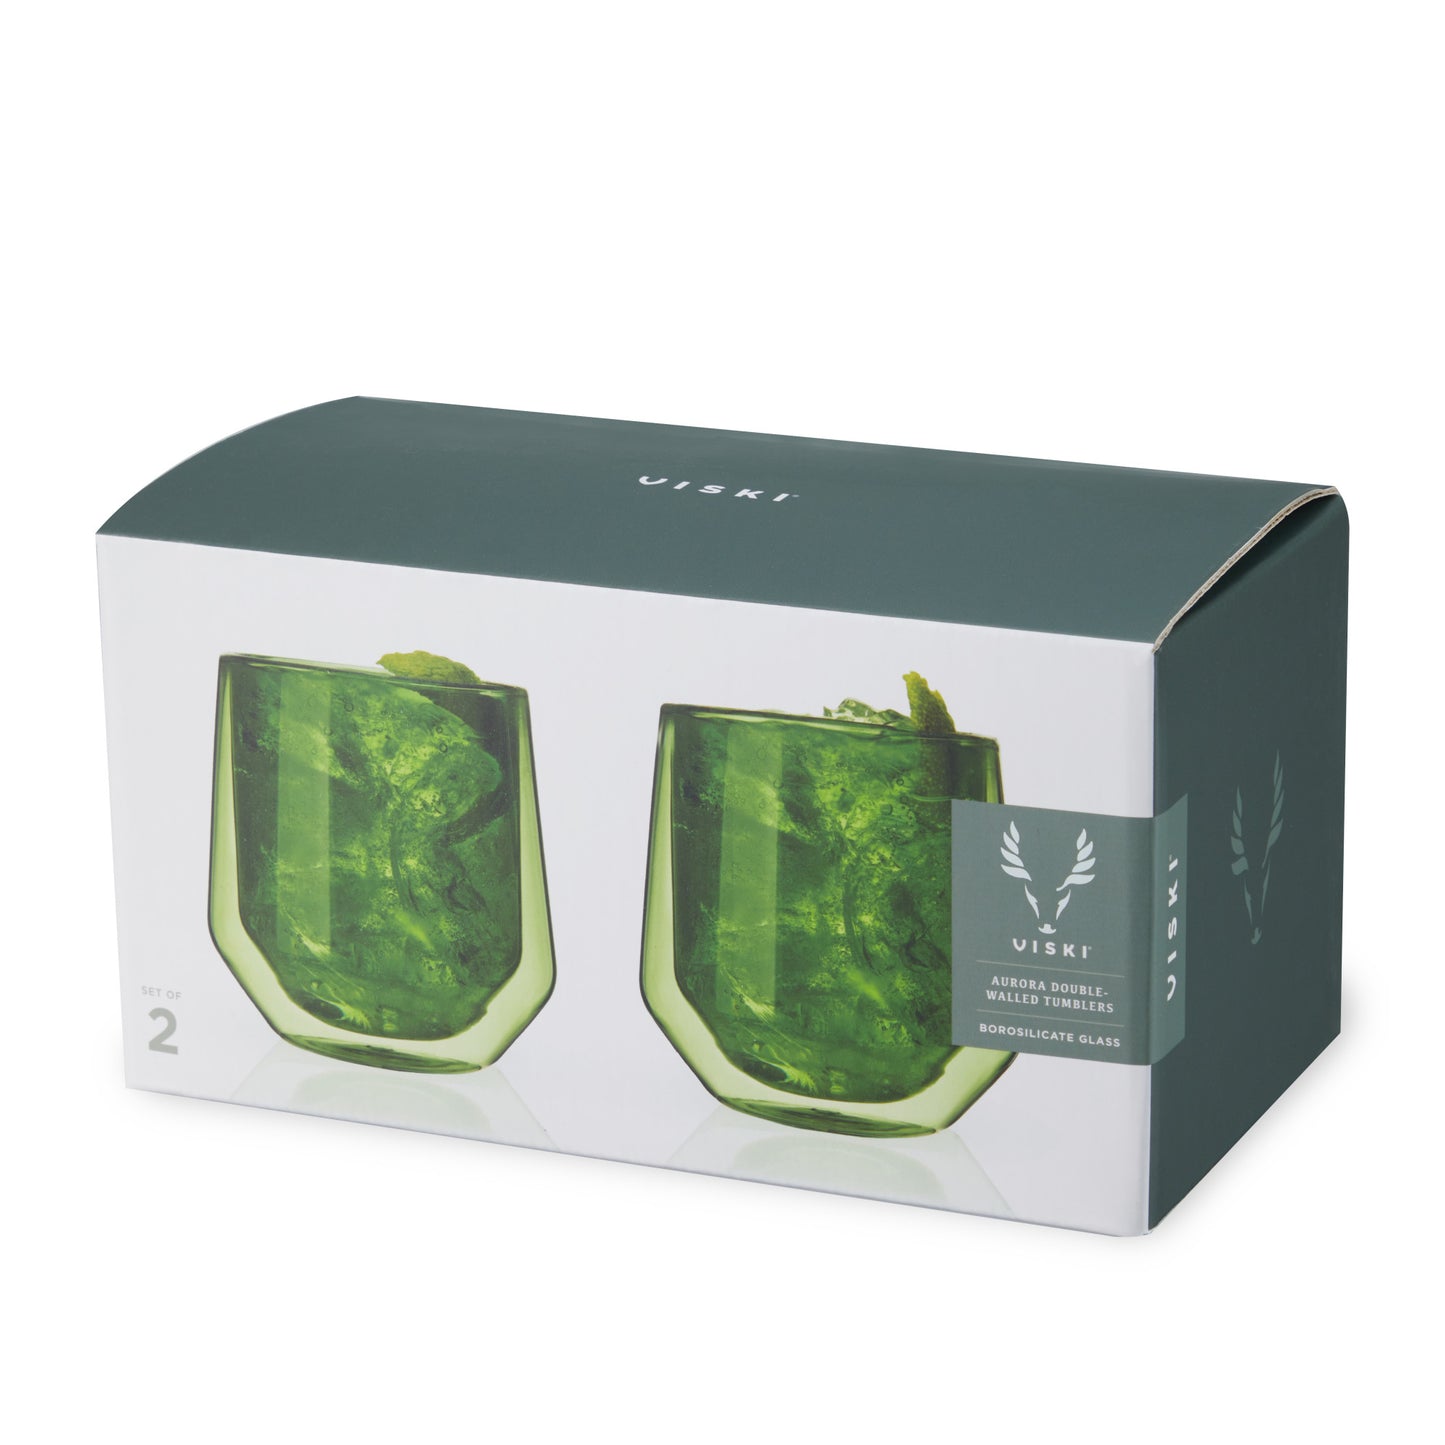 Double Walled Aurora Tumblers in green (set of 2) by Viski